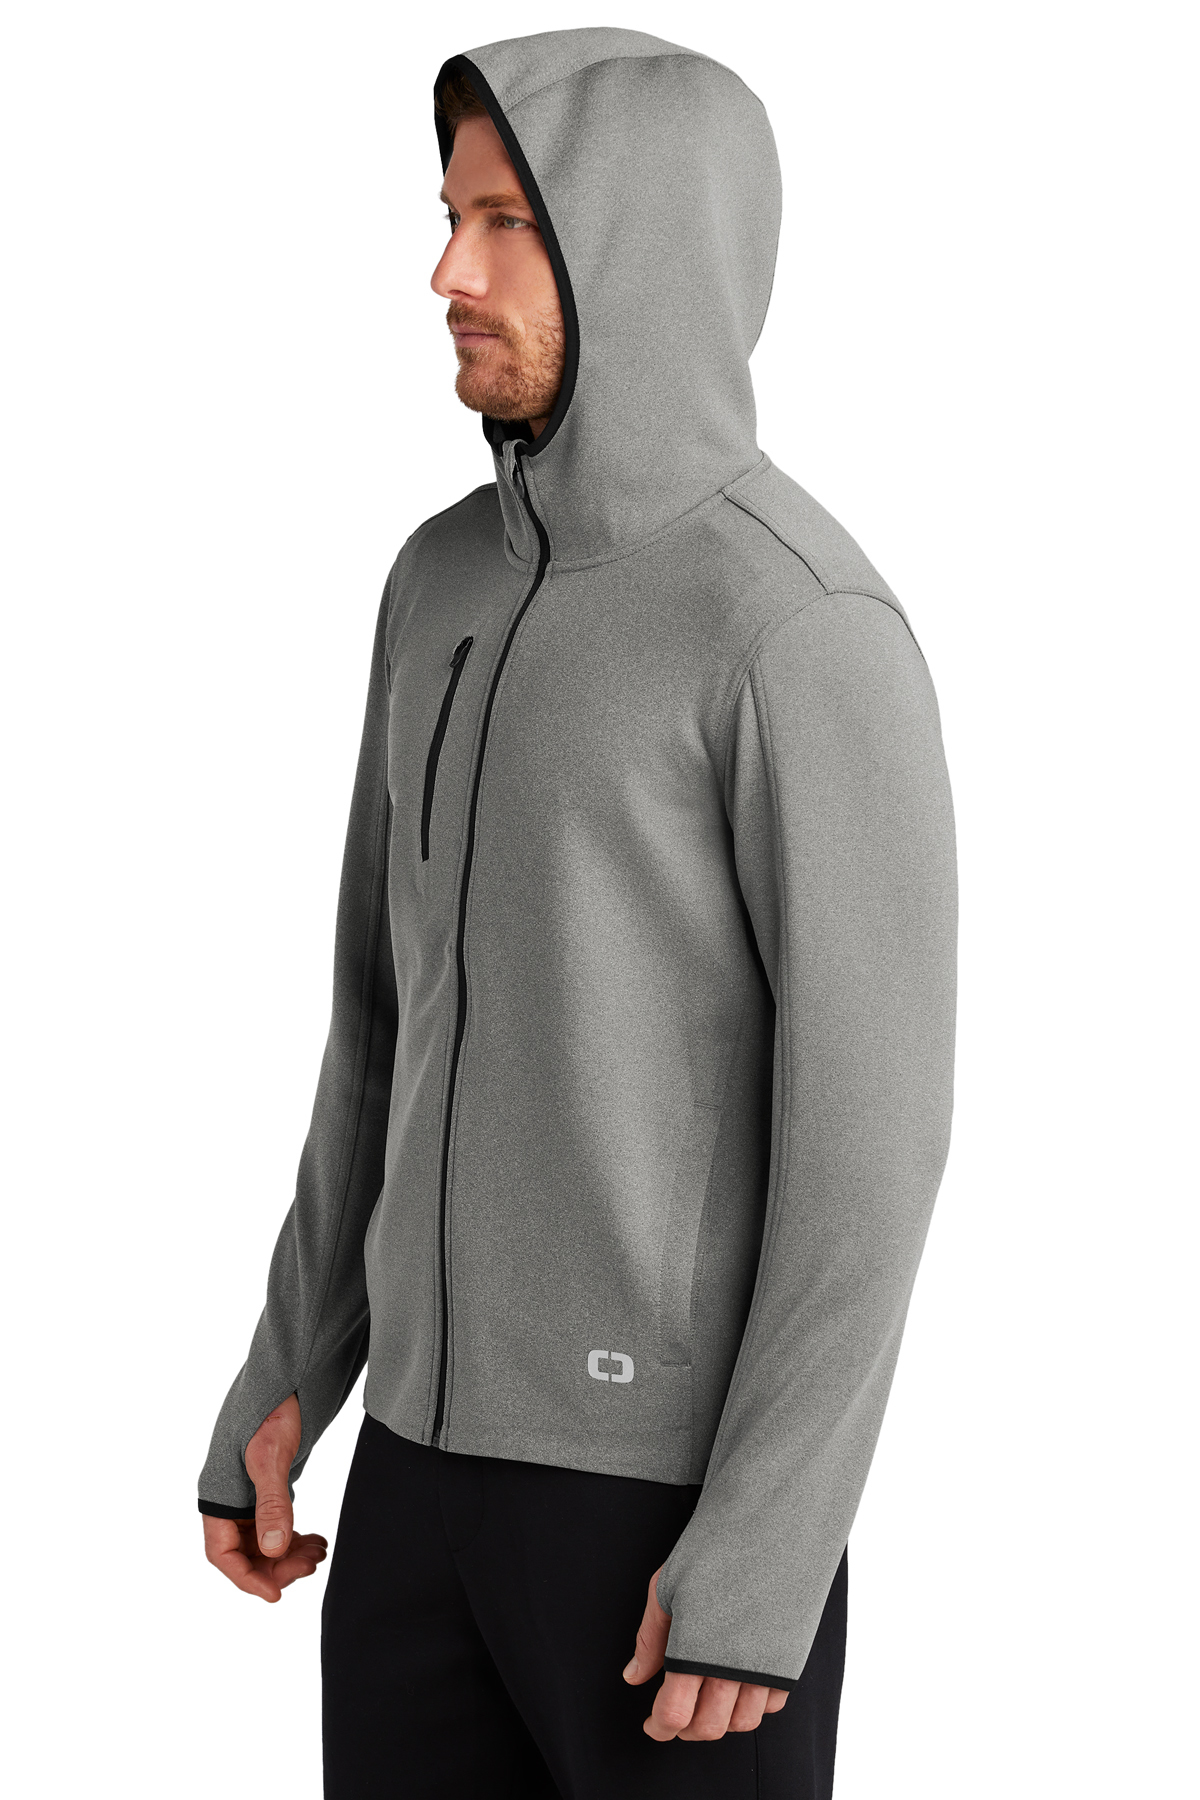 OGIO Stealth Full-Zip Jacket | Product | Company Casuals